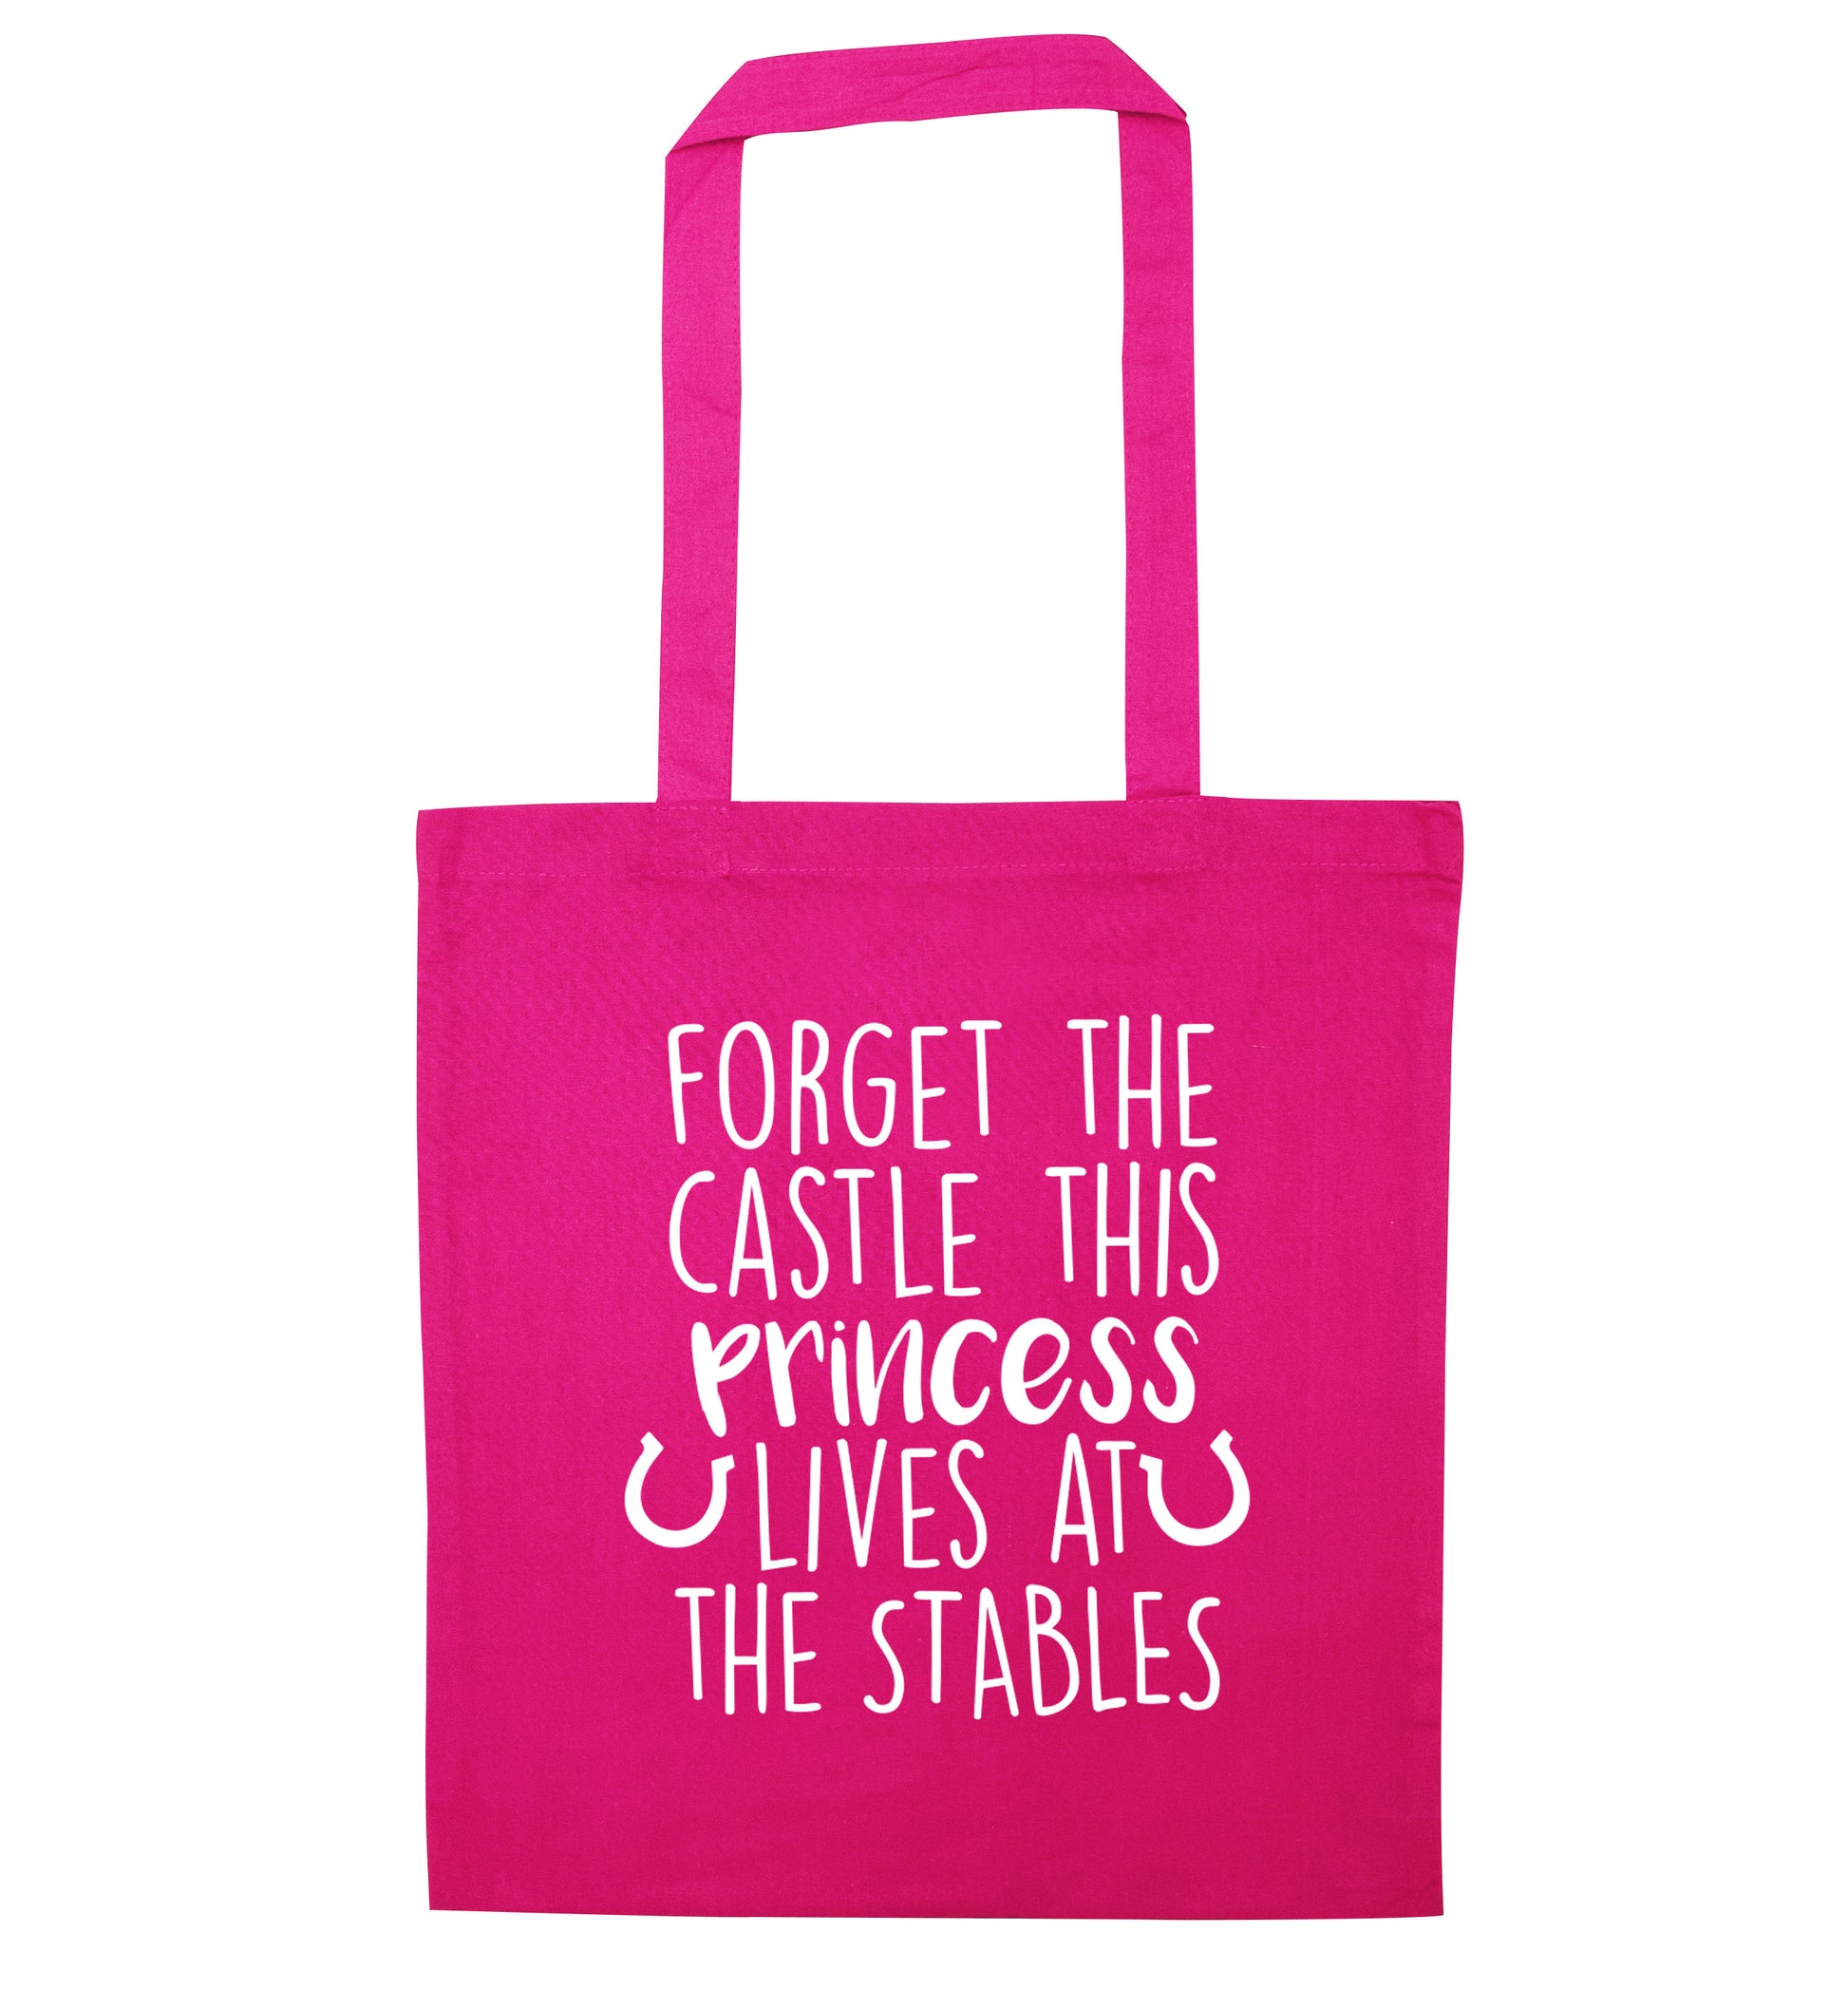 Forget the castle this princess lives at the stables pink tote bag